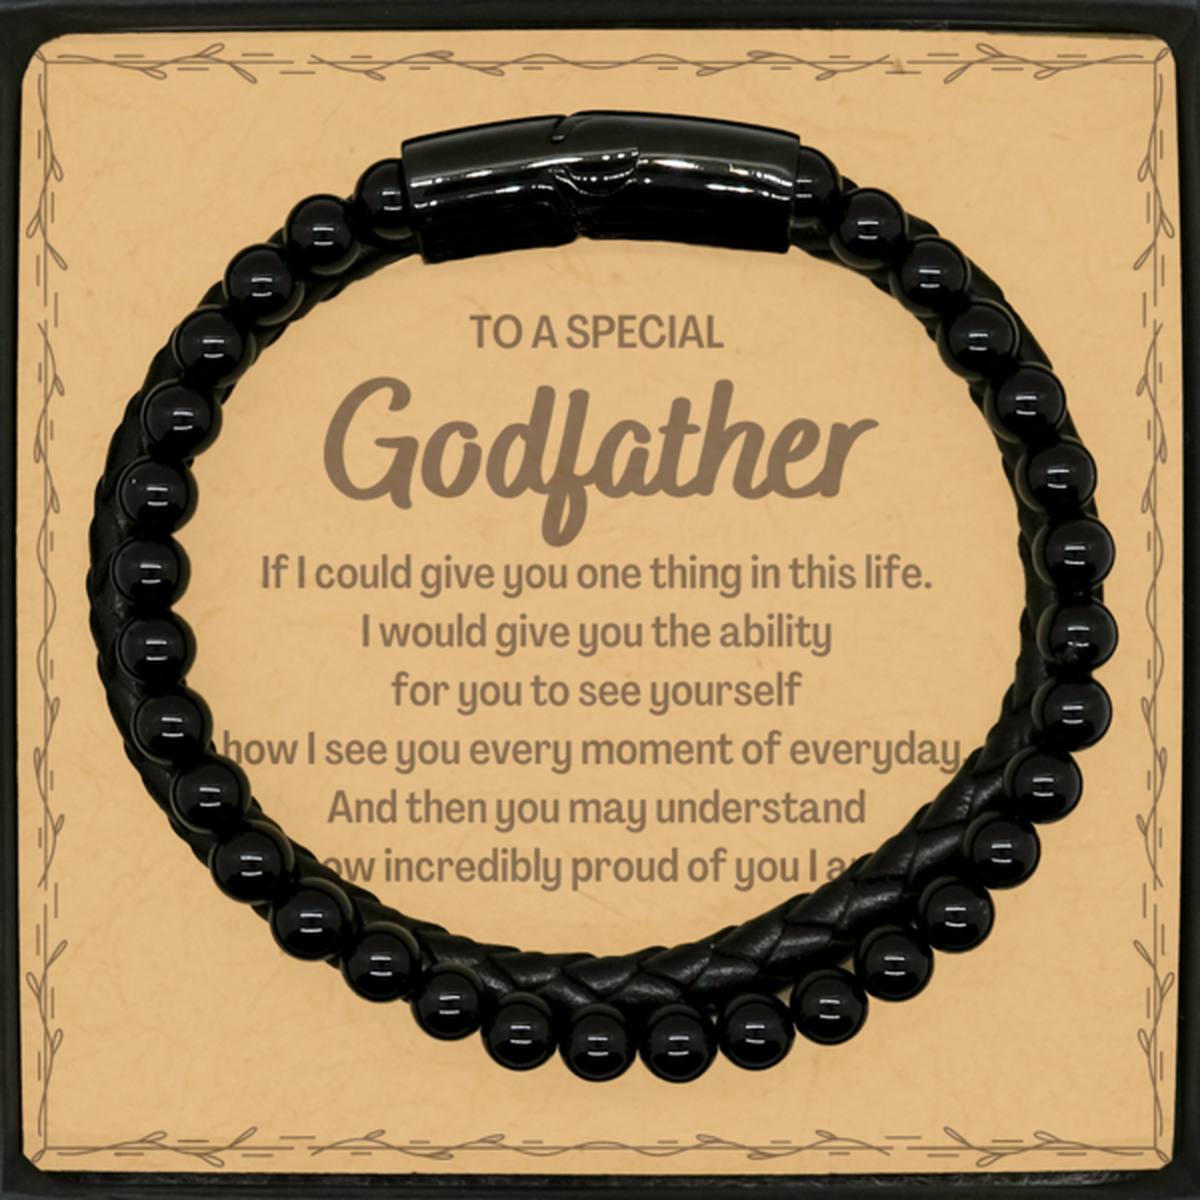 To My Godfather Stone Leather Bracelets, Gifts For Godfather Message Card, Inspirational Gifts for Christmas Birthday, Epic Gifts for Godfather To A Special Godfather how incredibly proud of you I am